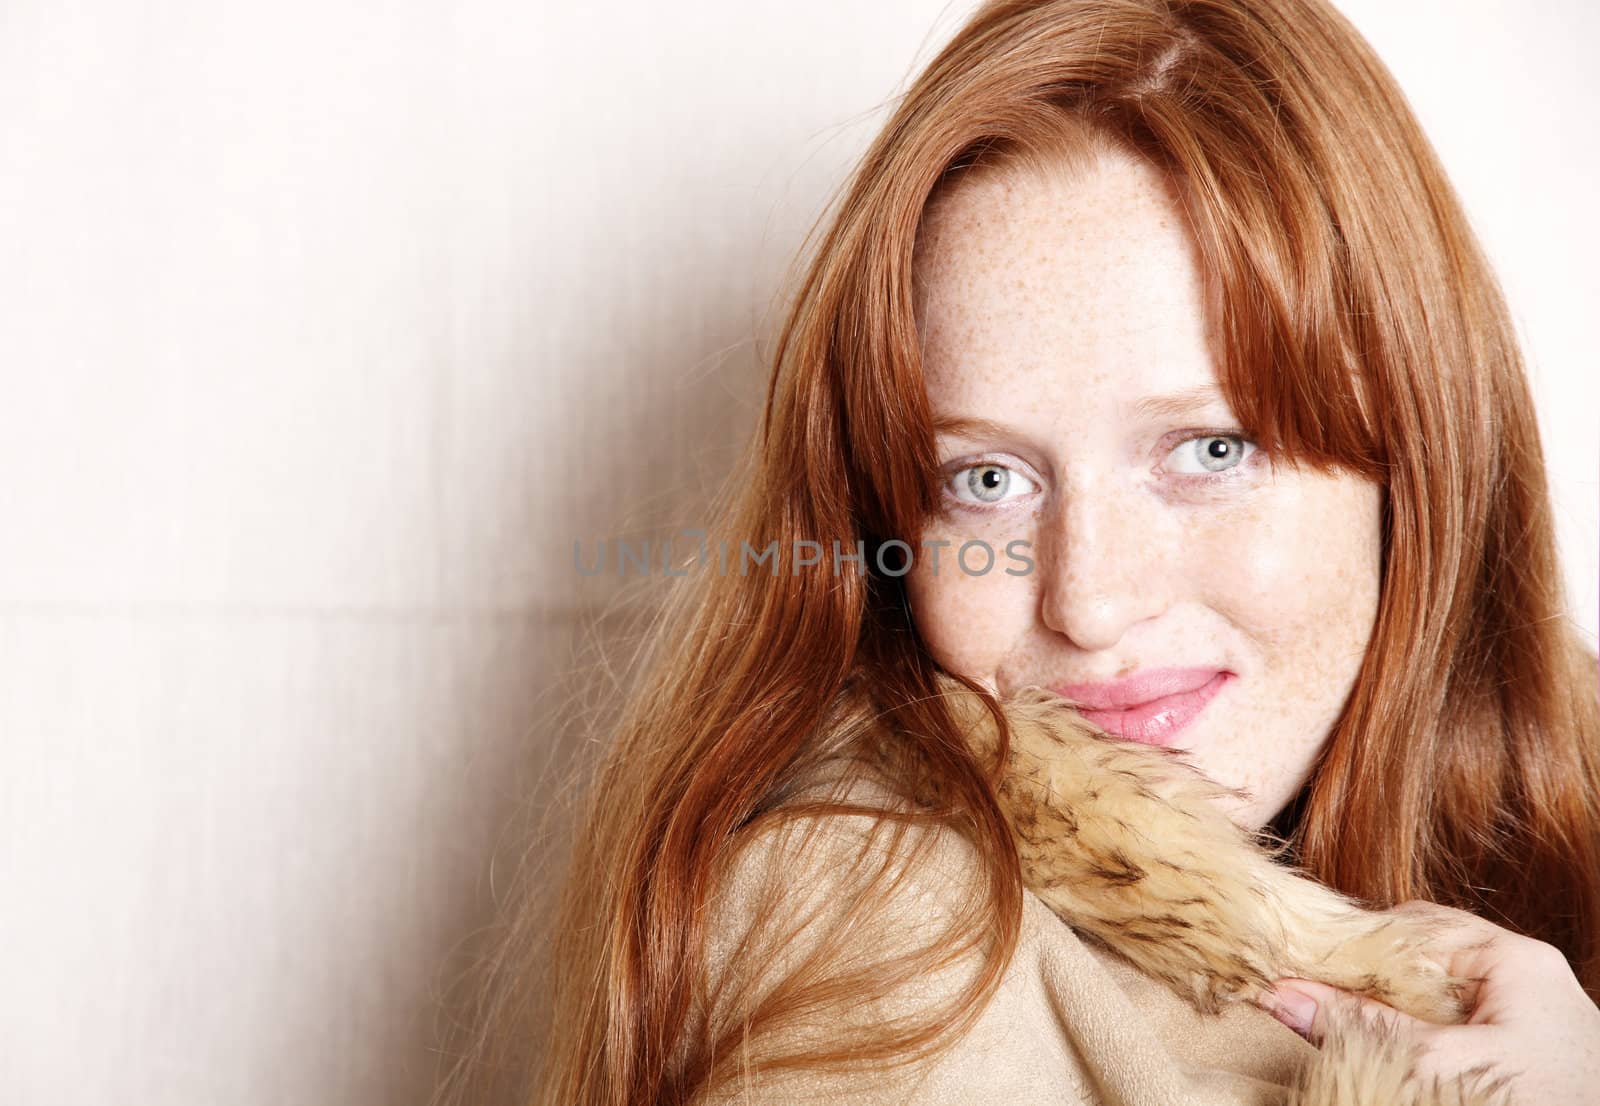 A attractive young, redhead  woman in Winter clothing.  